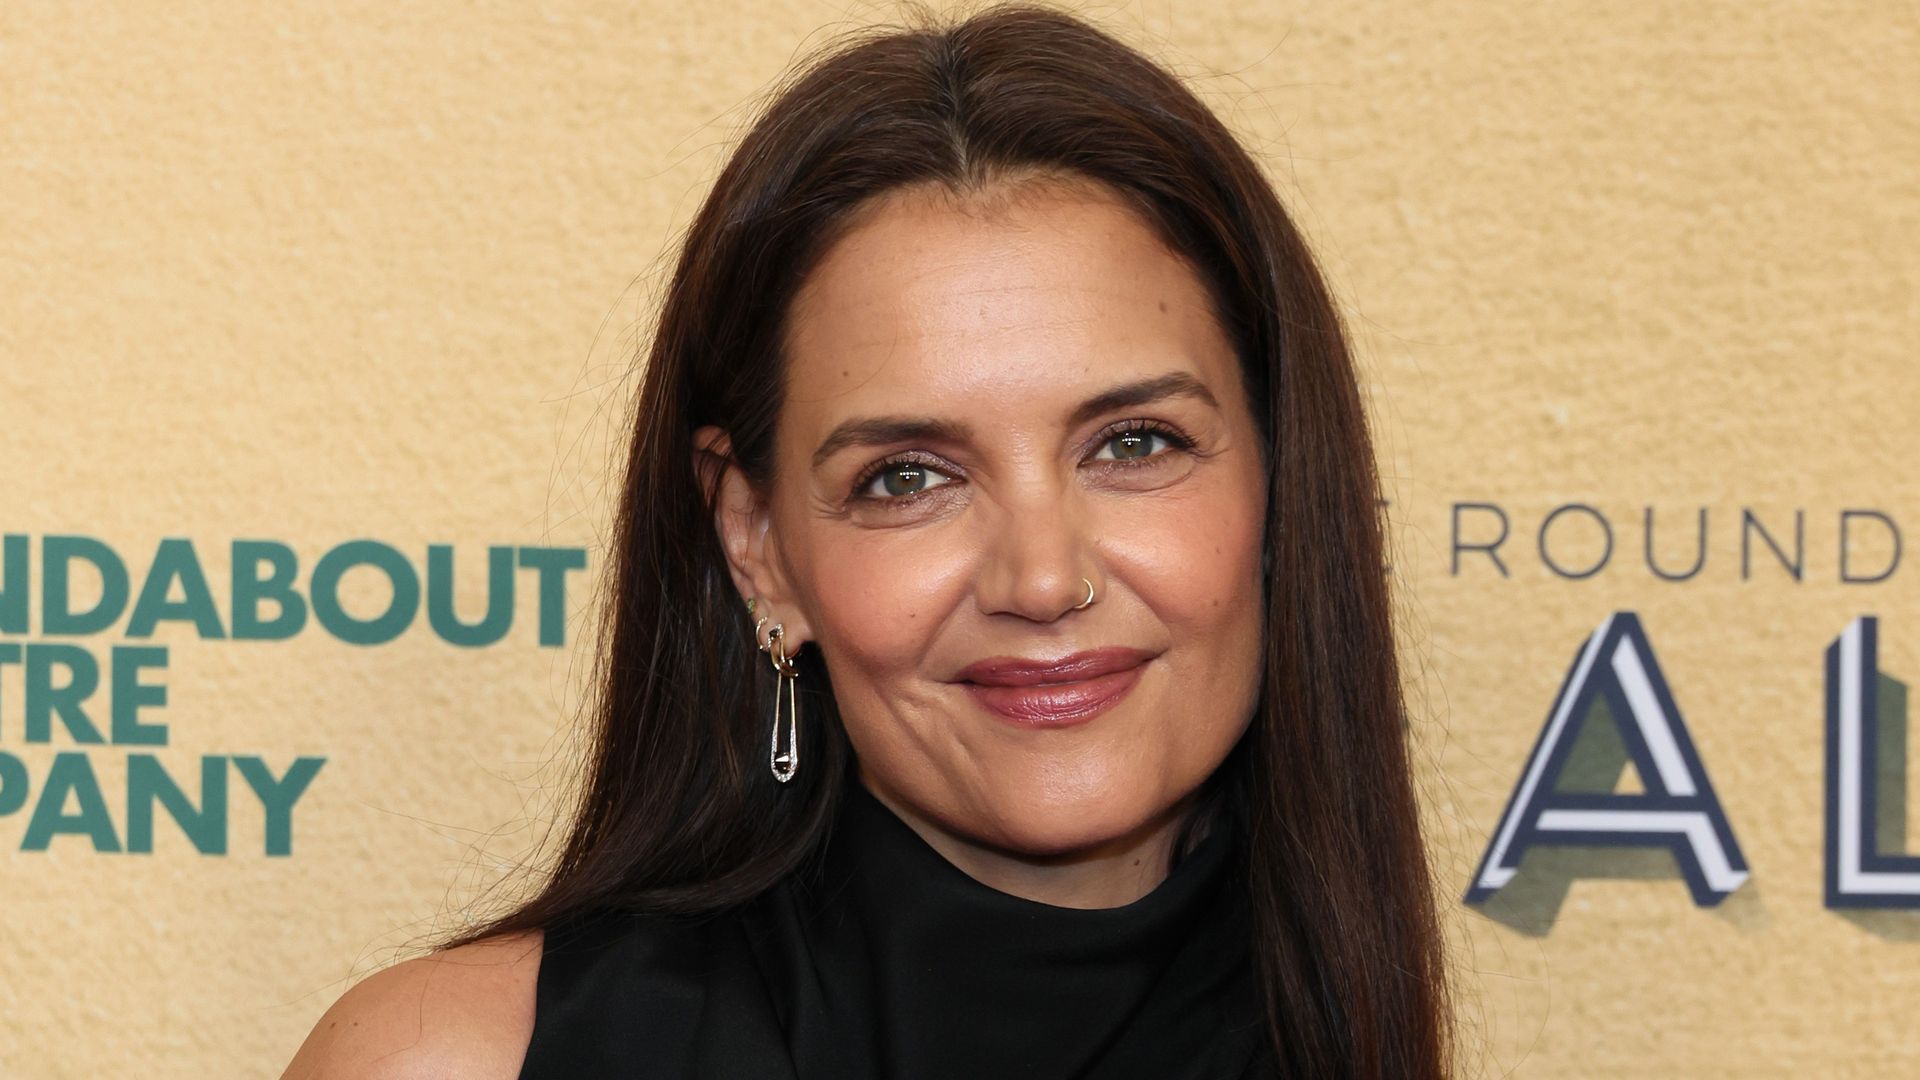 Katie Holmes stuns in body-skimming dress in first appearance since 'false' Tom Cruise reports